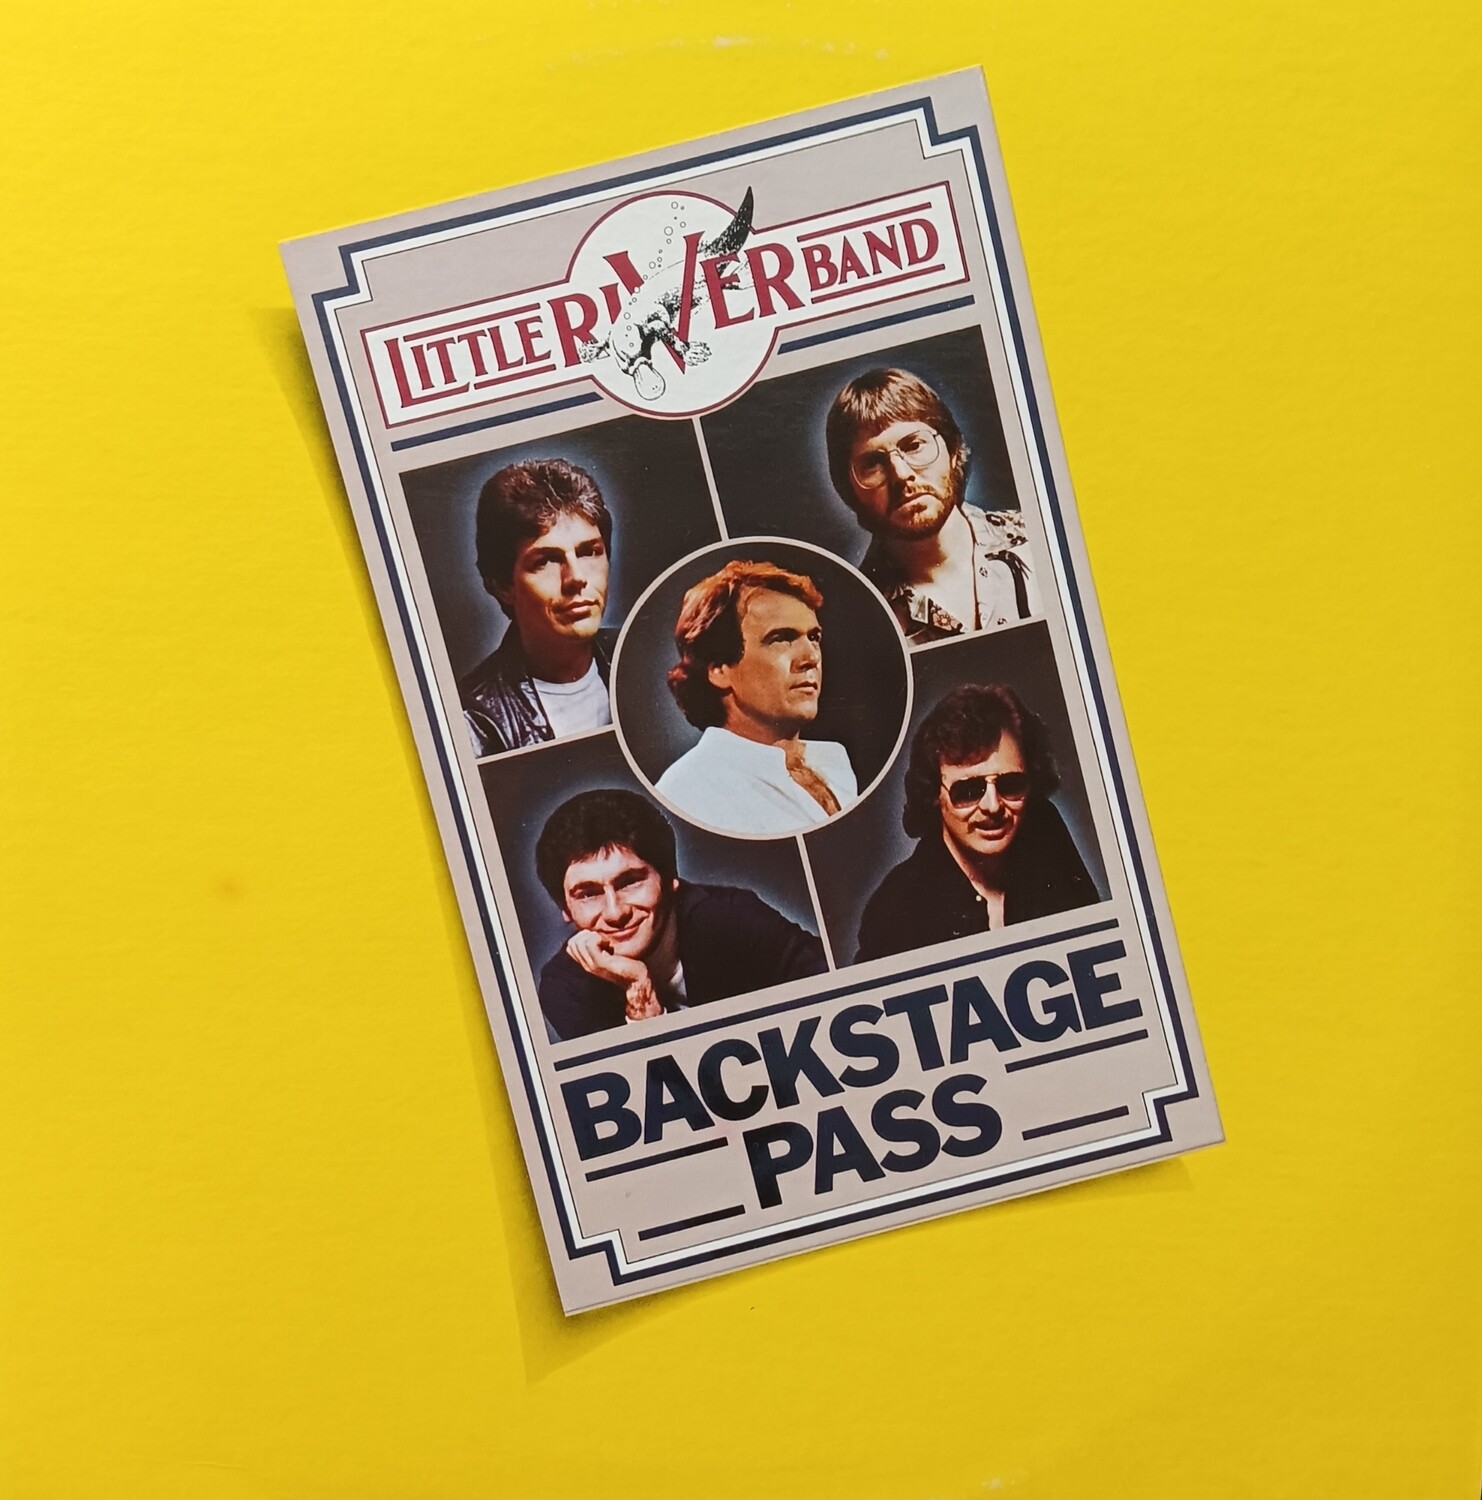 LITTLE RIVER BAND - Backstage Pass